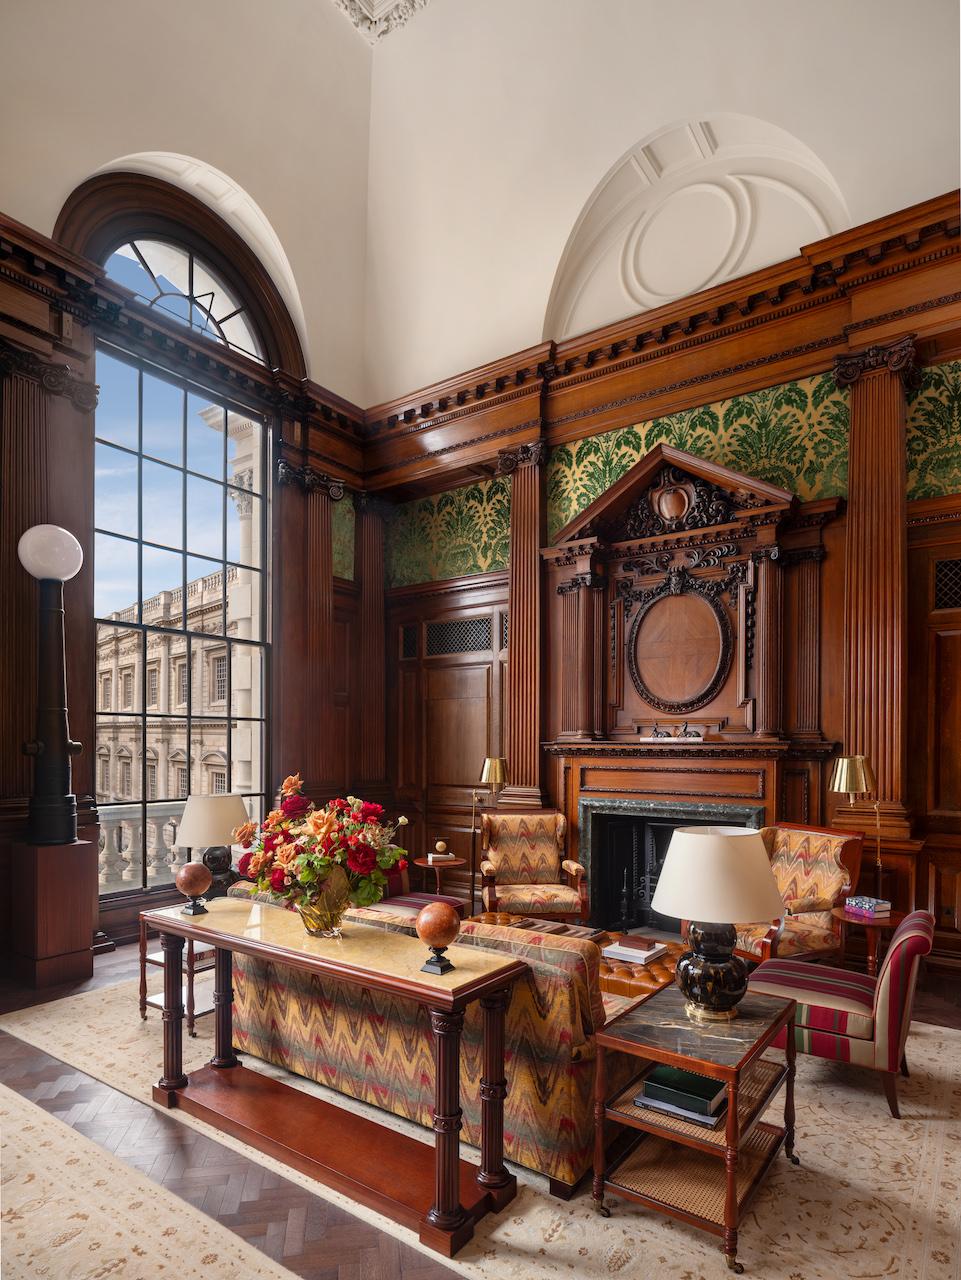 Winston Churchill's Historic Office Transformed Into Raffles' First London Hotel at The OWO